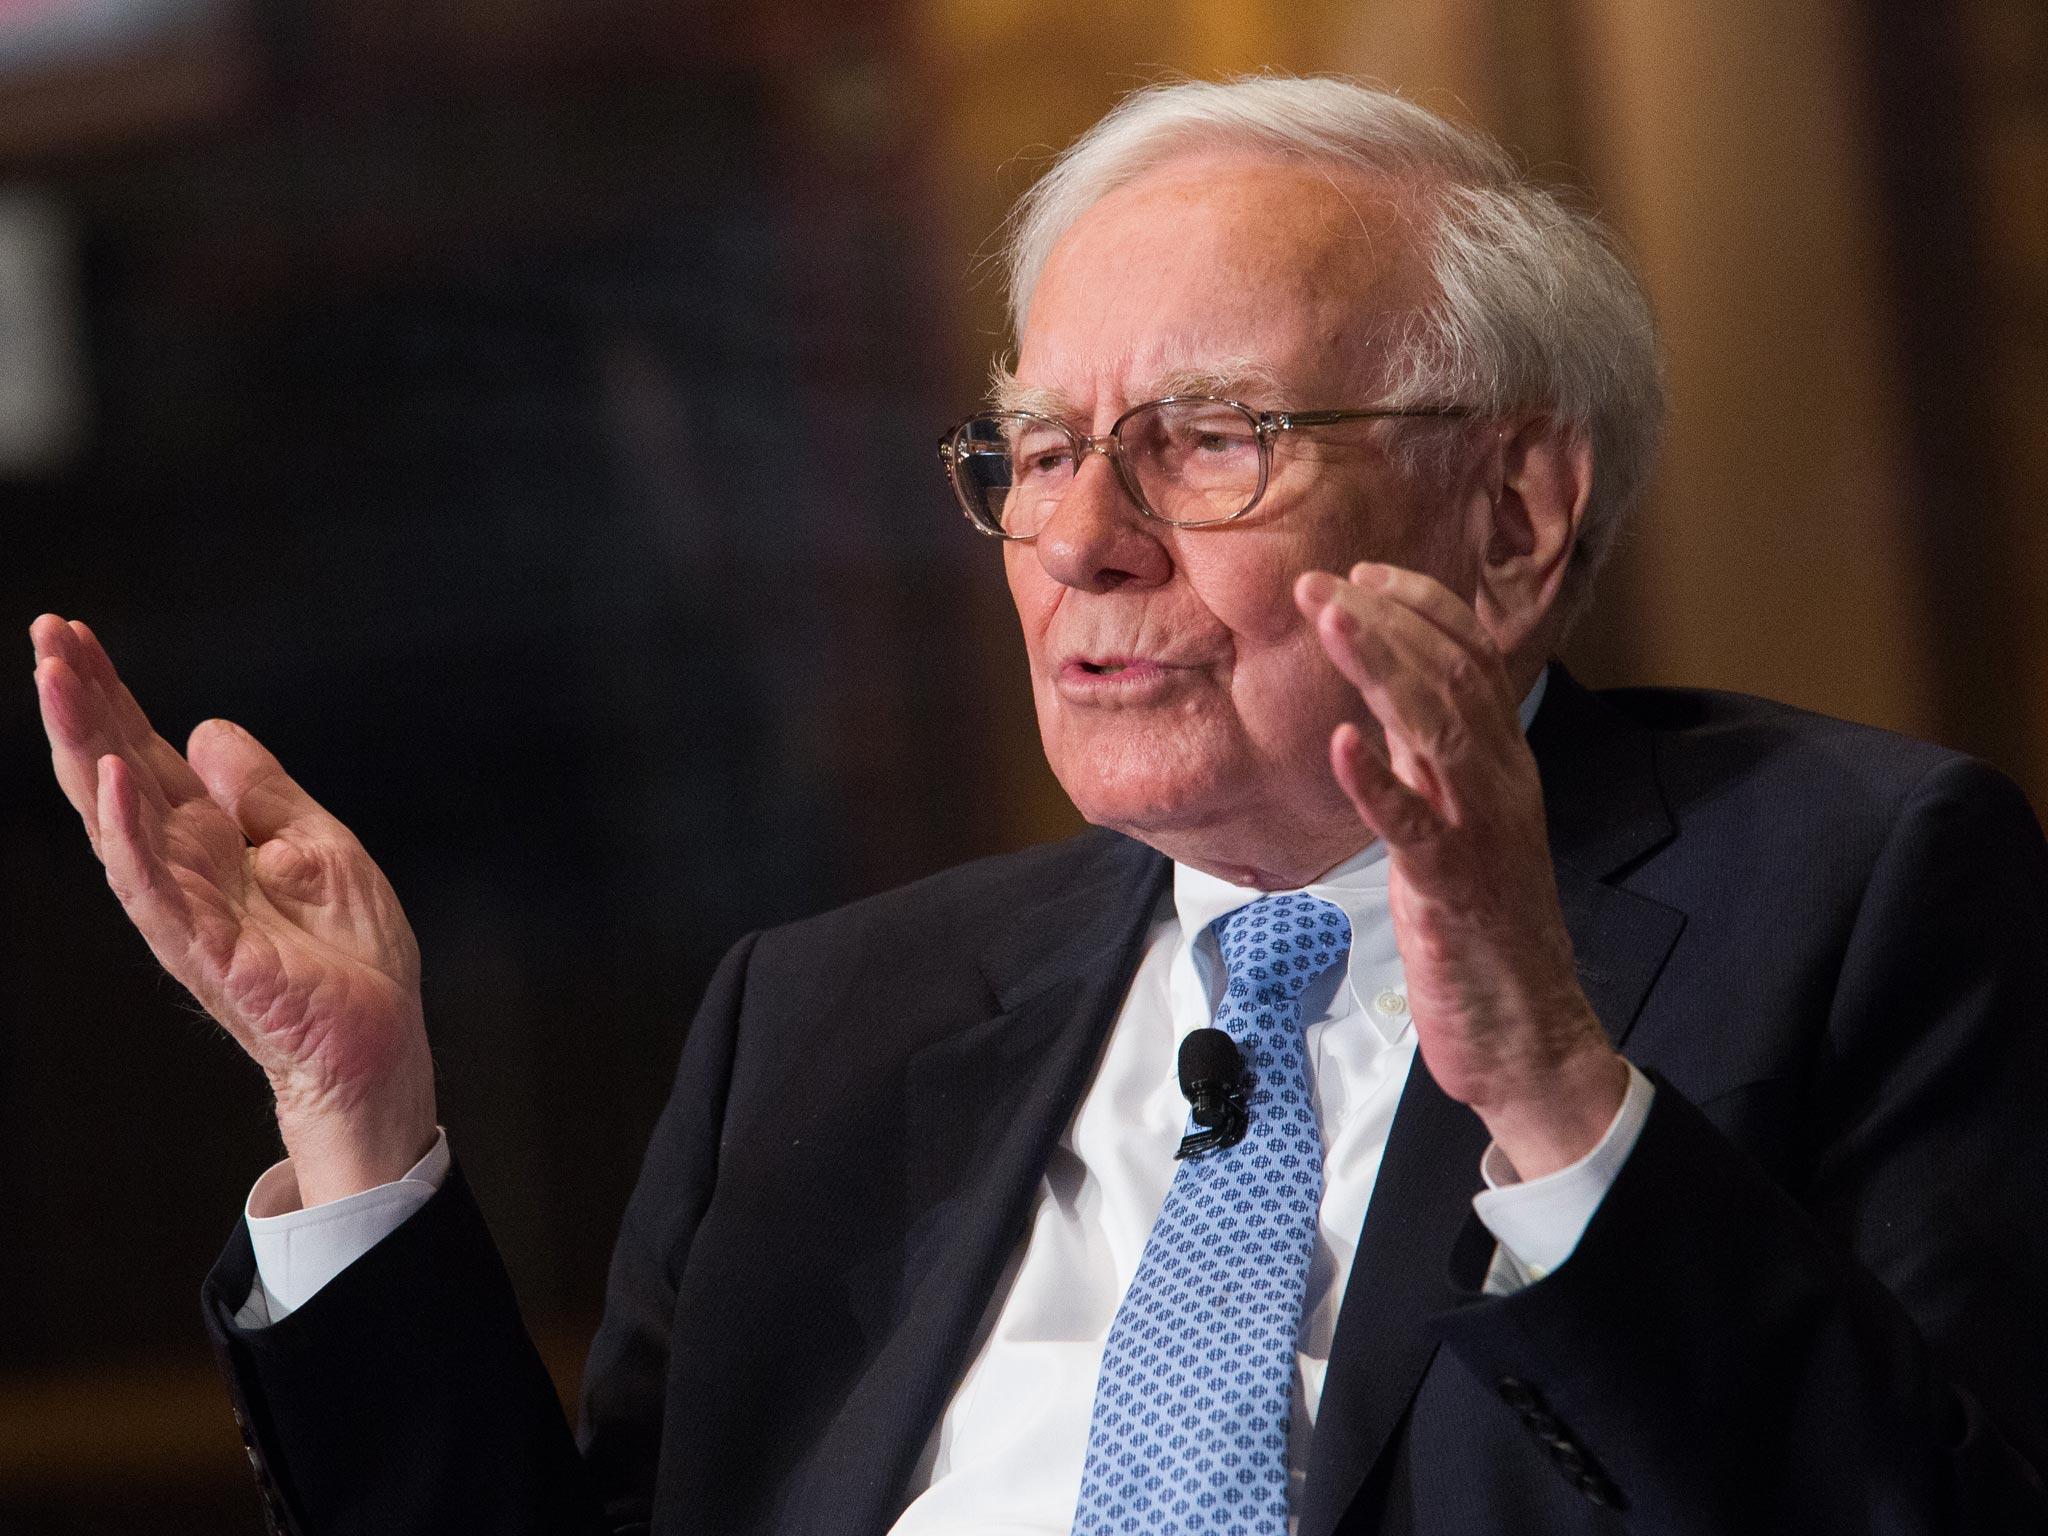 Warren Buffett is the exception - fund managers must be monitored